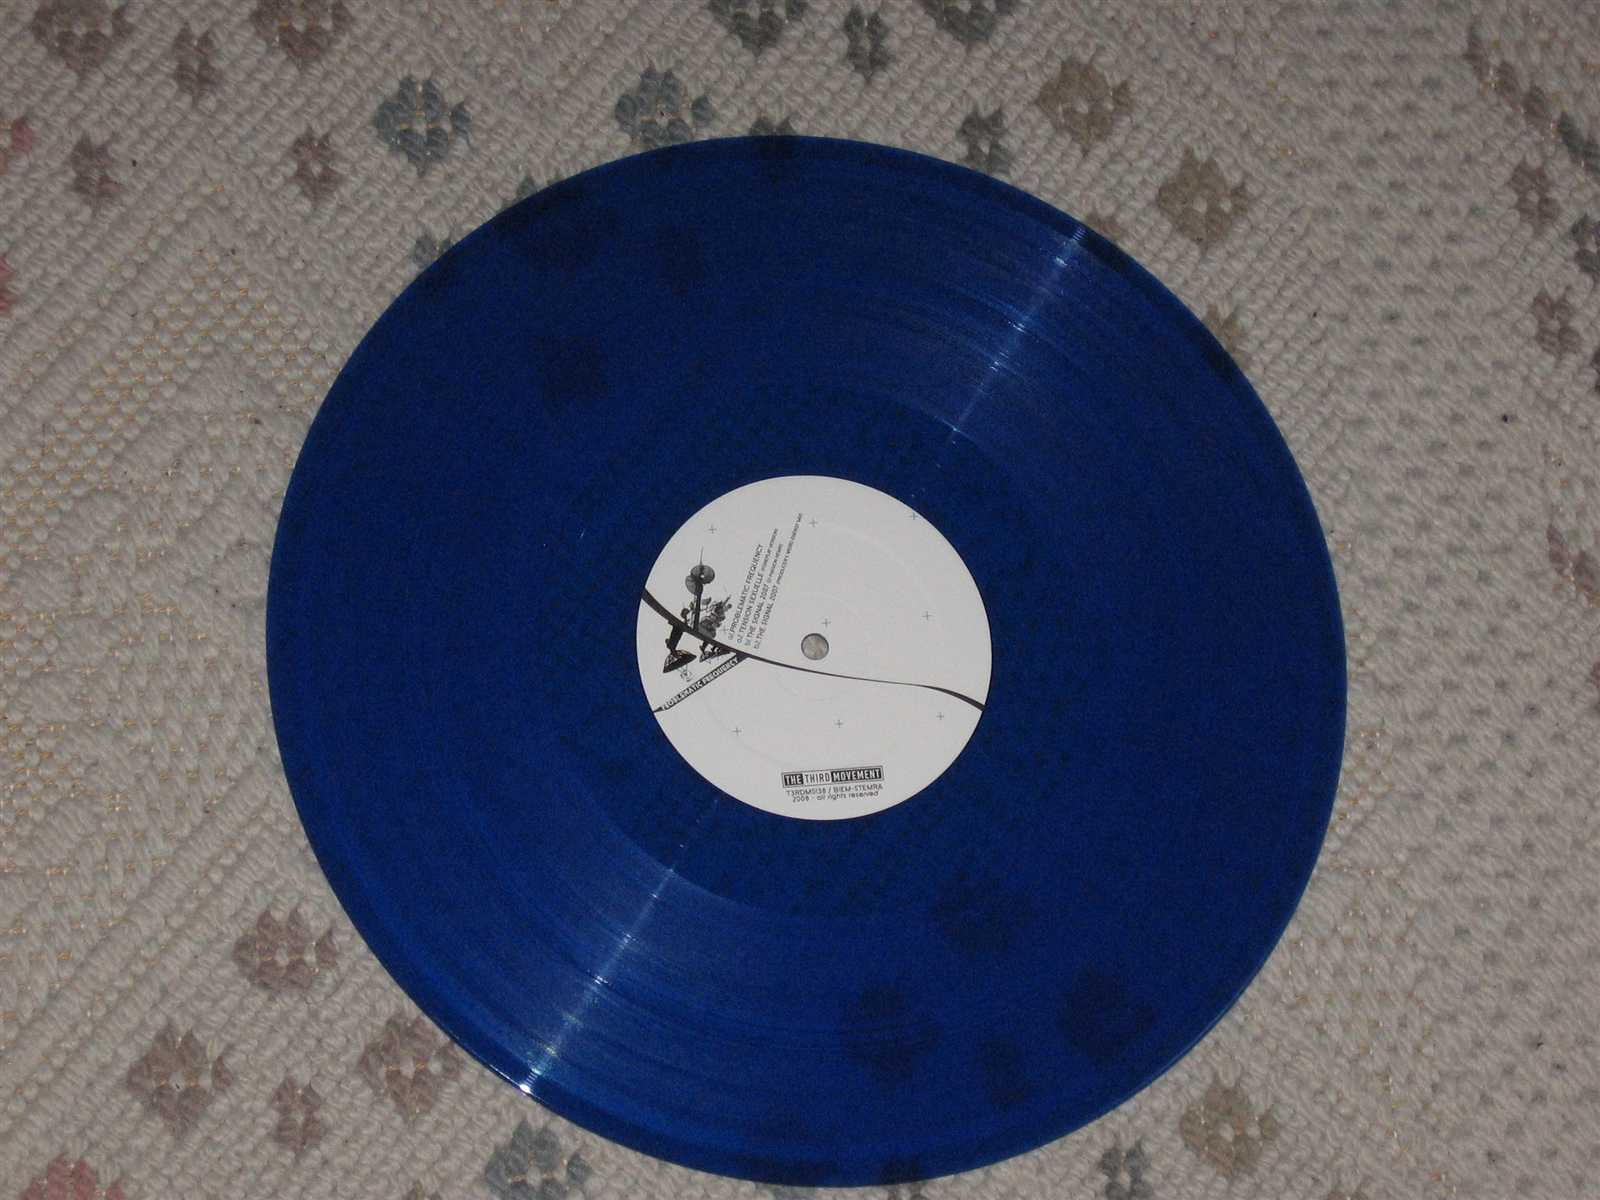 (T3RDM138) The Dj Producer - Problematic Frequency (Vinyl 1)